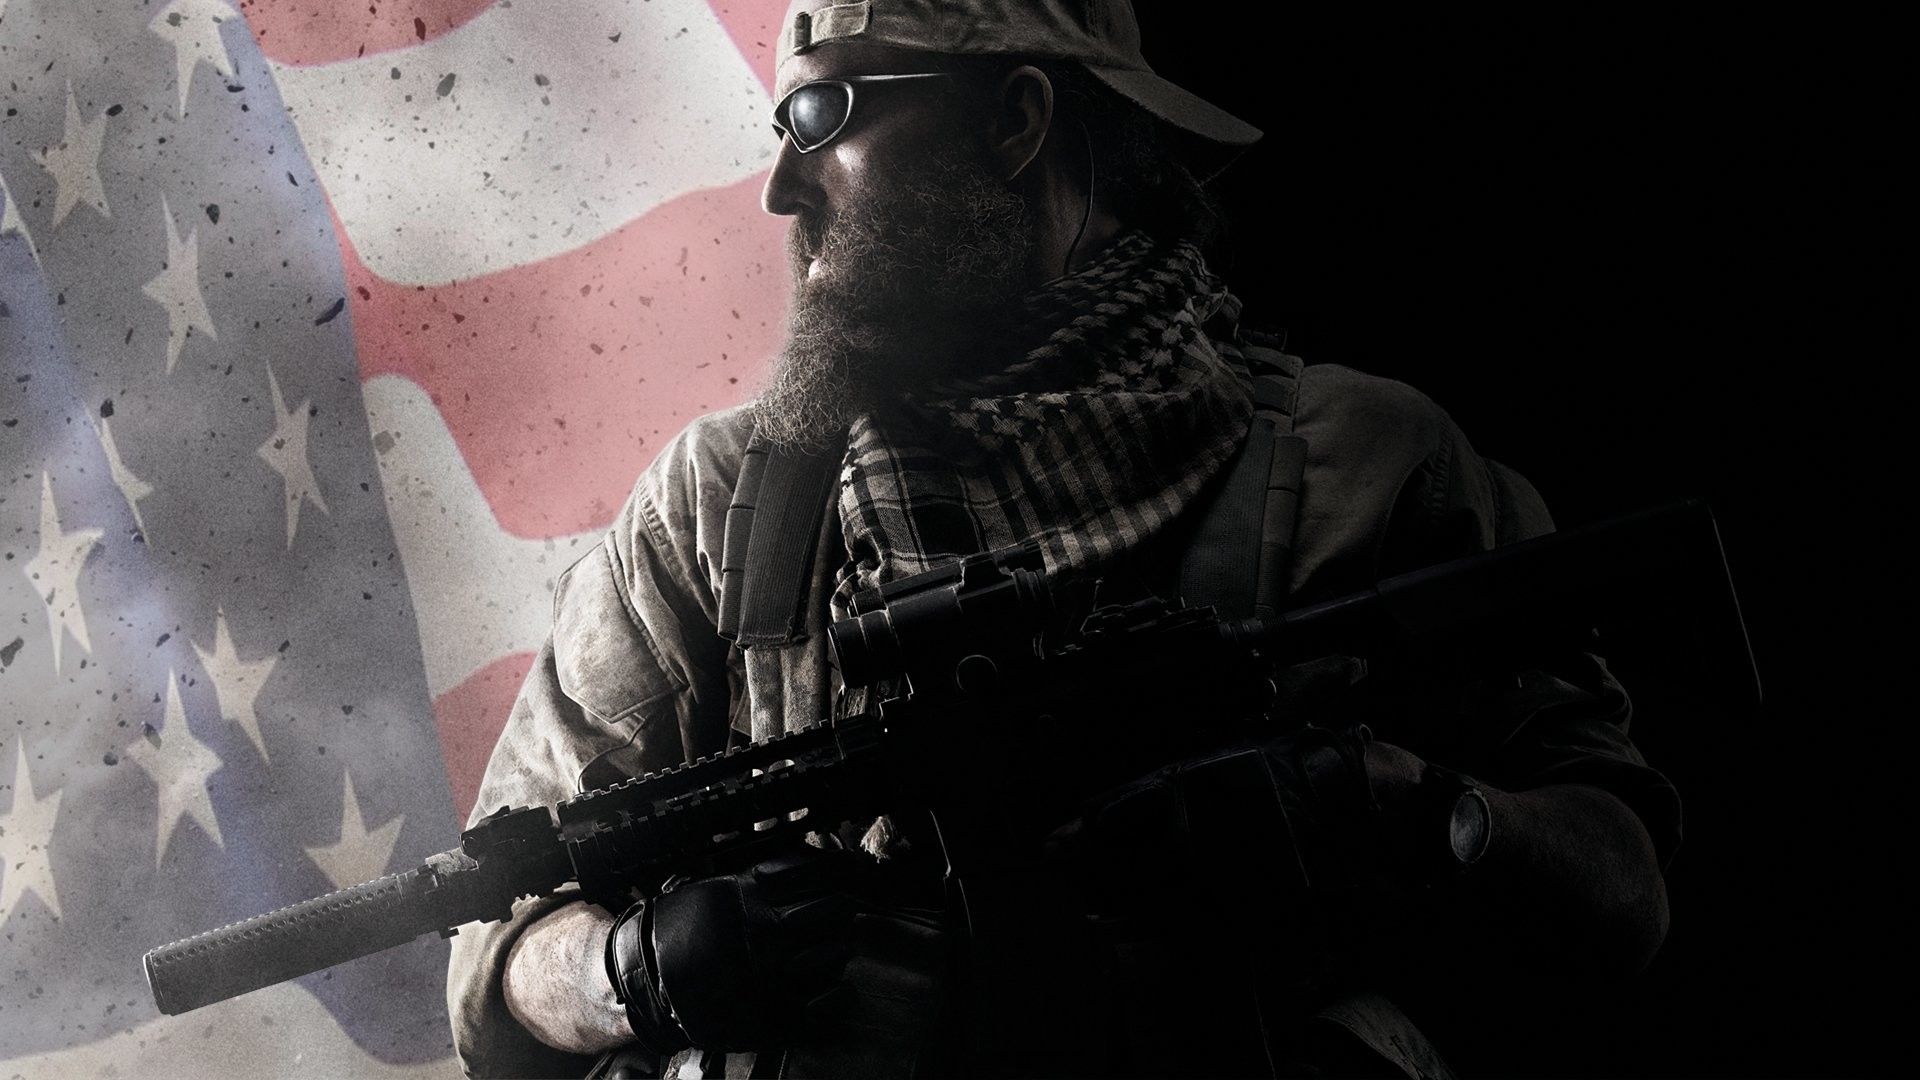 Medal Of Honor Wallpapers